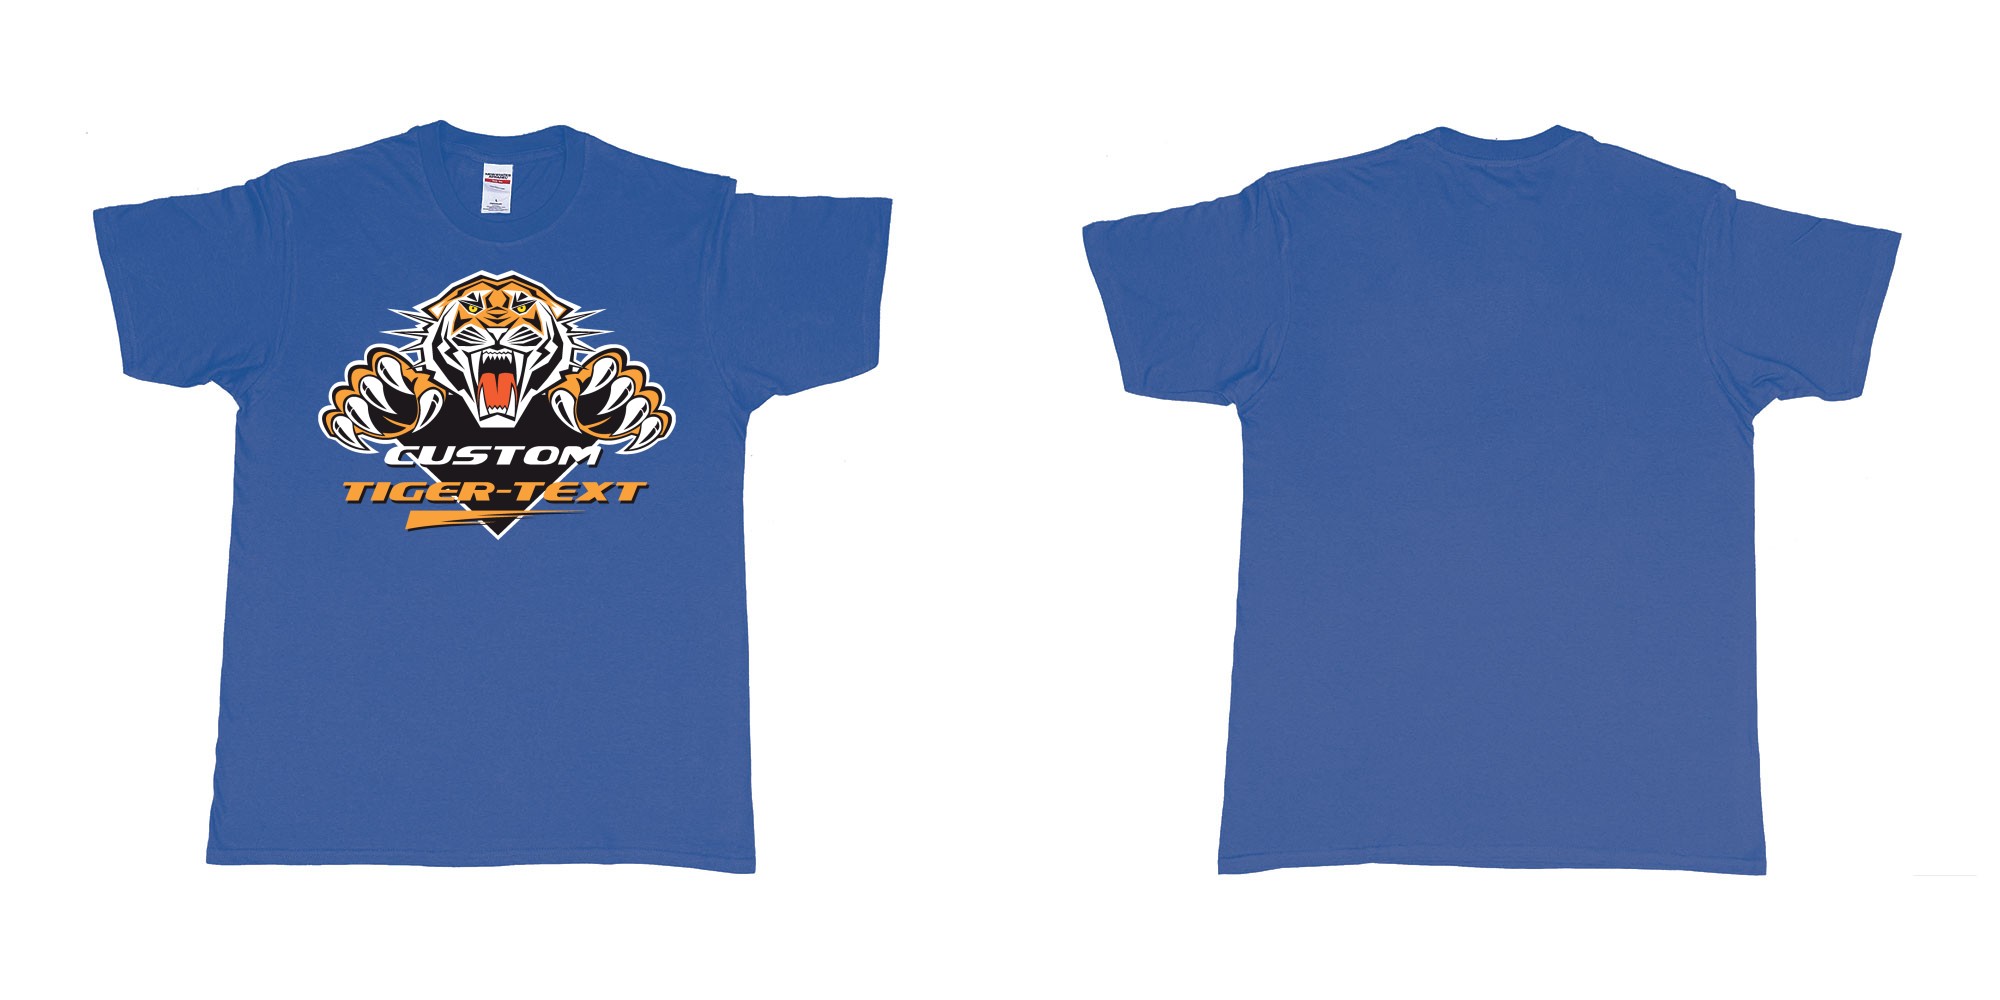 Custom tshirt design the wests tigers sydney national rugby league custom tshirt print in fabric color royal-blue choice your own text made in Bali by The Pirate Way